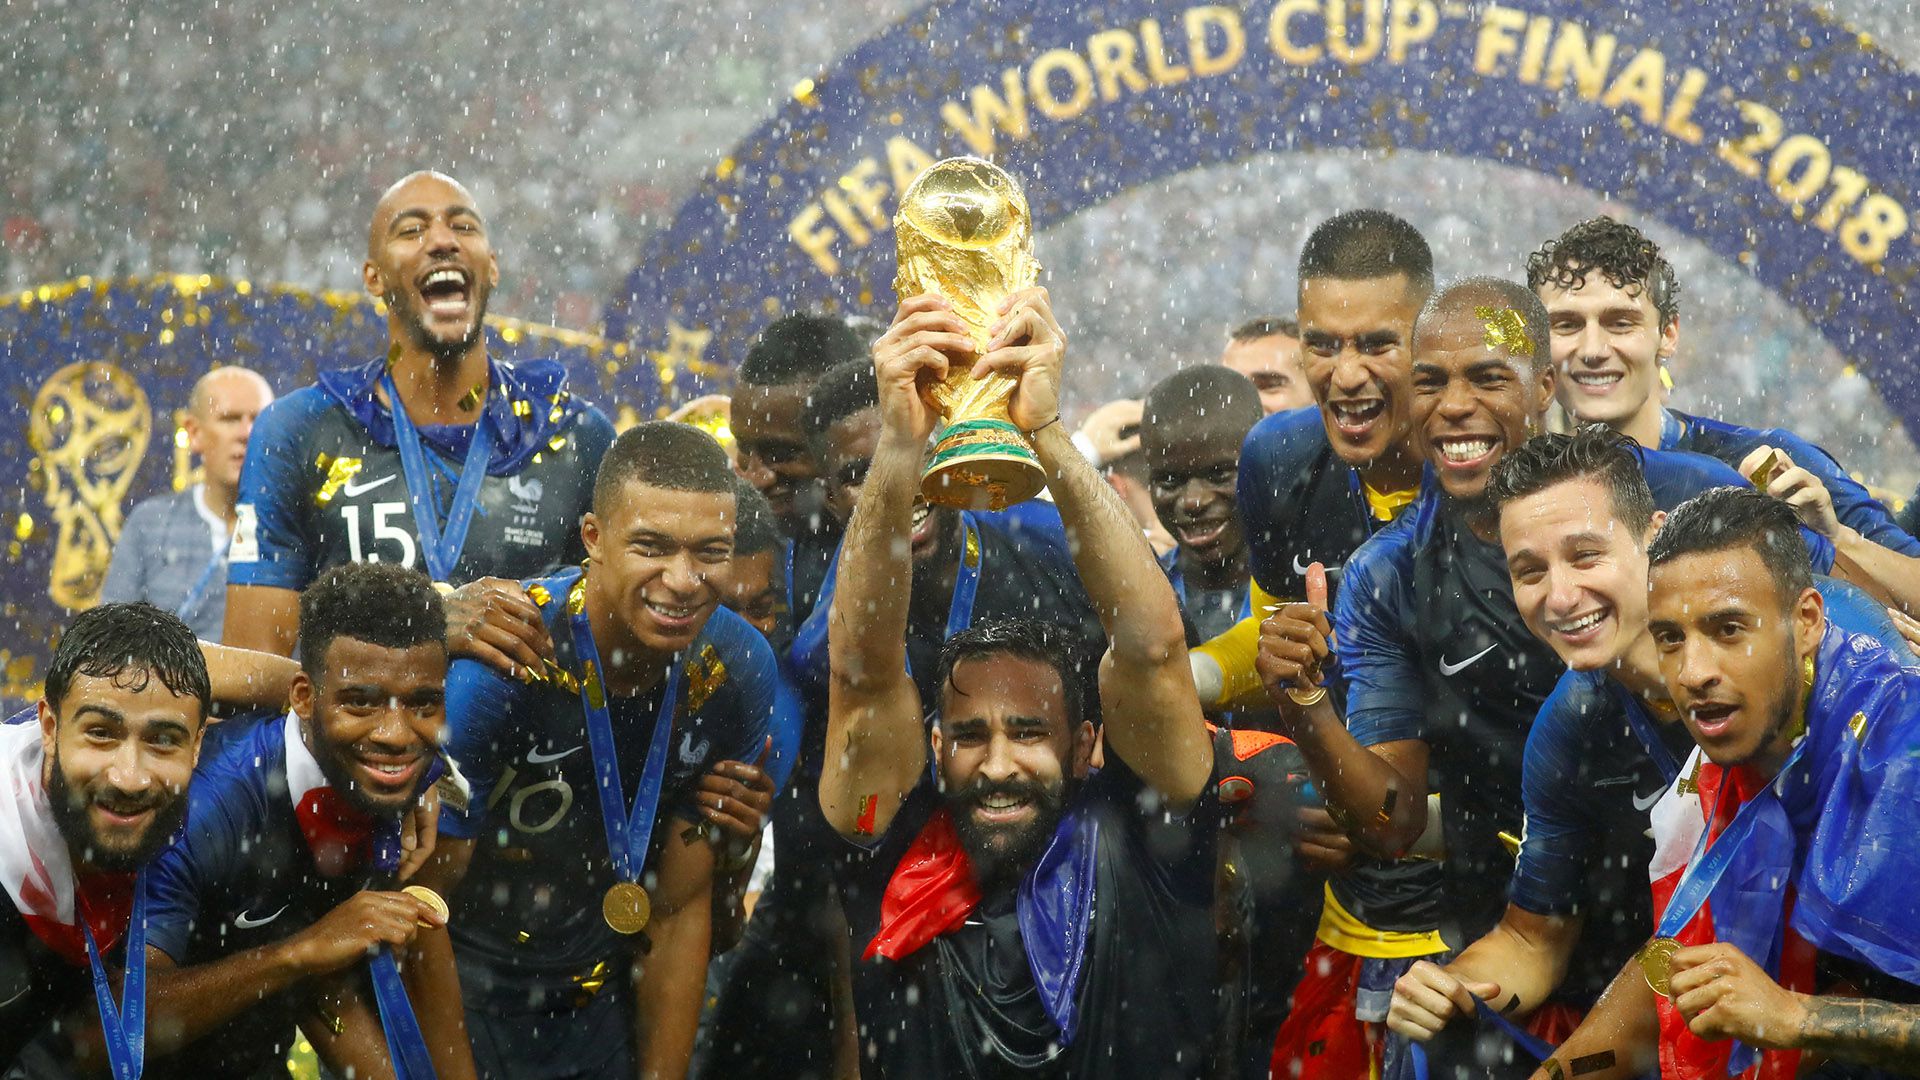 Soccer Football - World Cup - Final - France v Croatia - Luzhniki Stadium, Moscow, Russia - July 15, 2018 France's Adil Rami and team mates celebrate with the trophy after winning the World Cup REUTERS/Kai Pfaffenbach